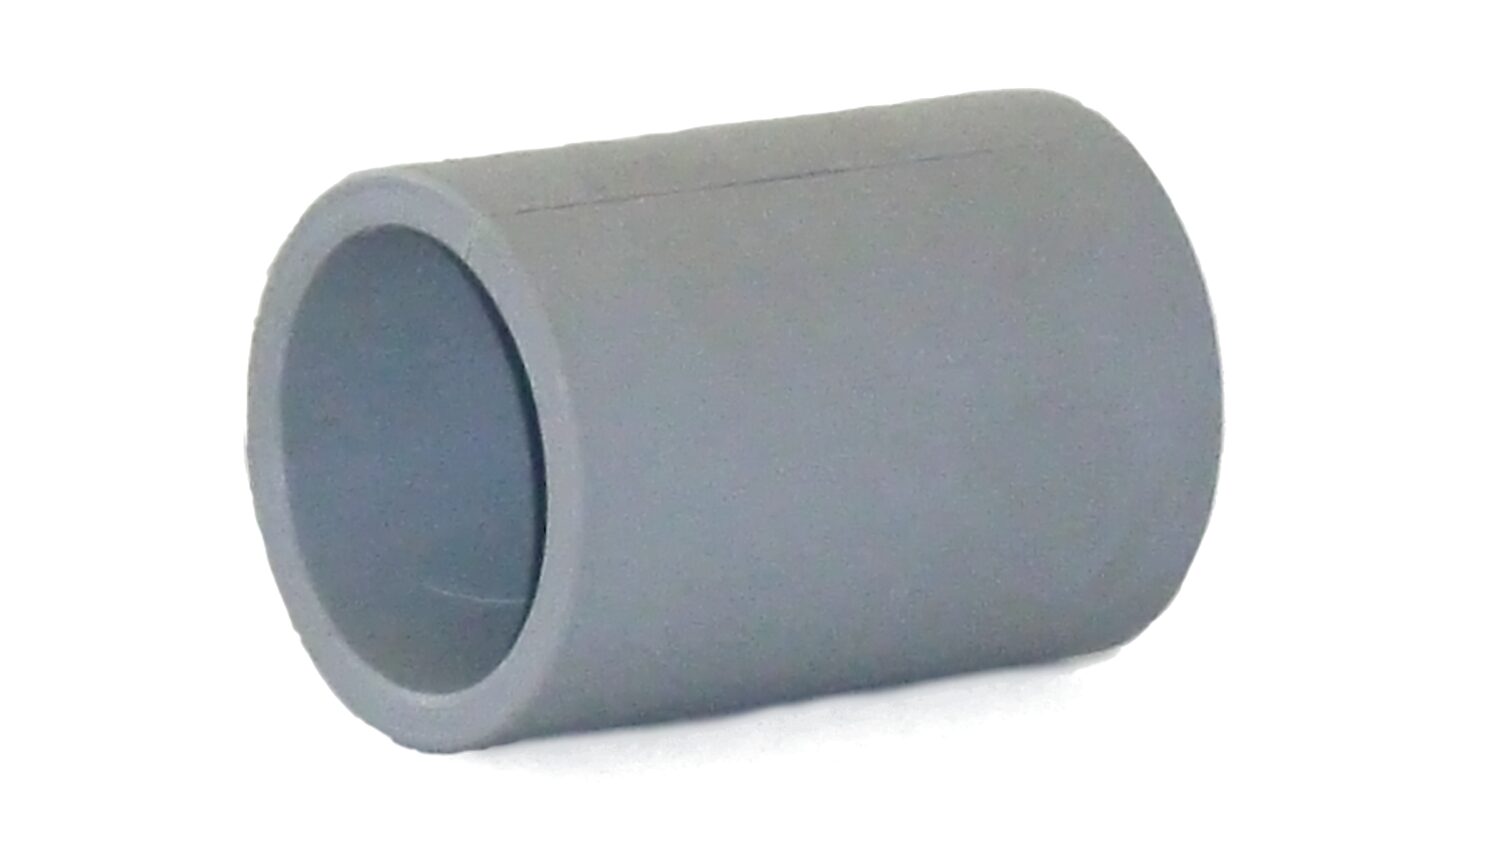 FOBA adapter sleeve for studio stand beams